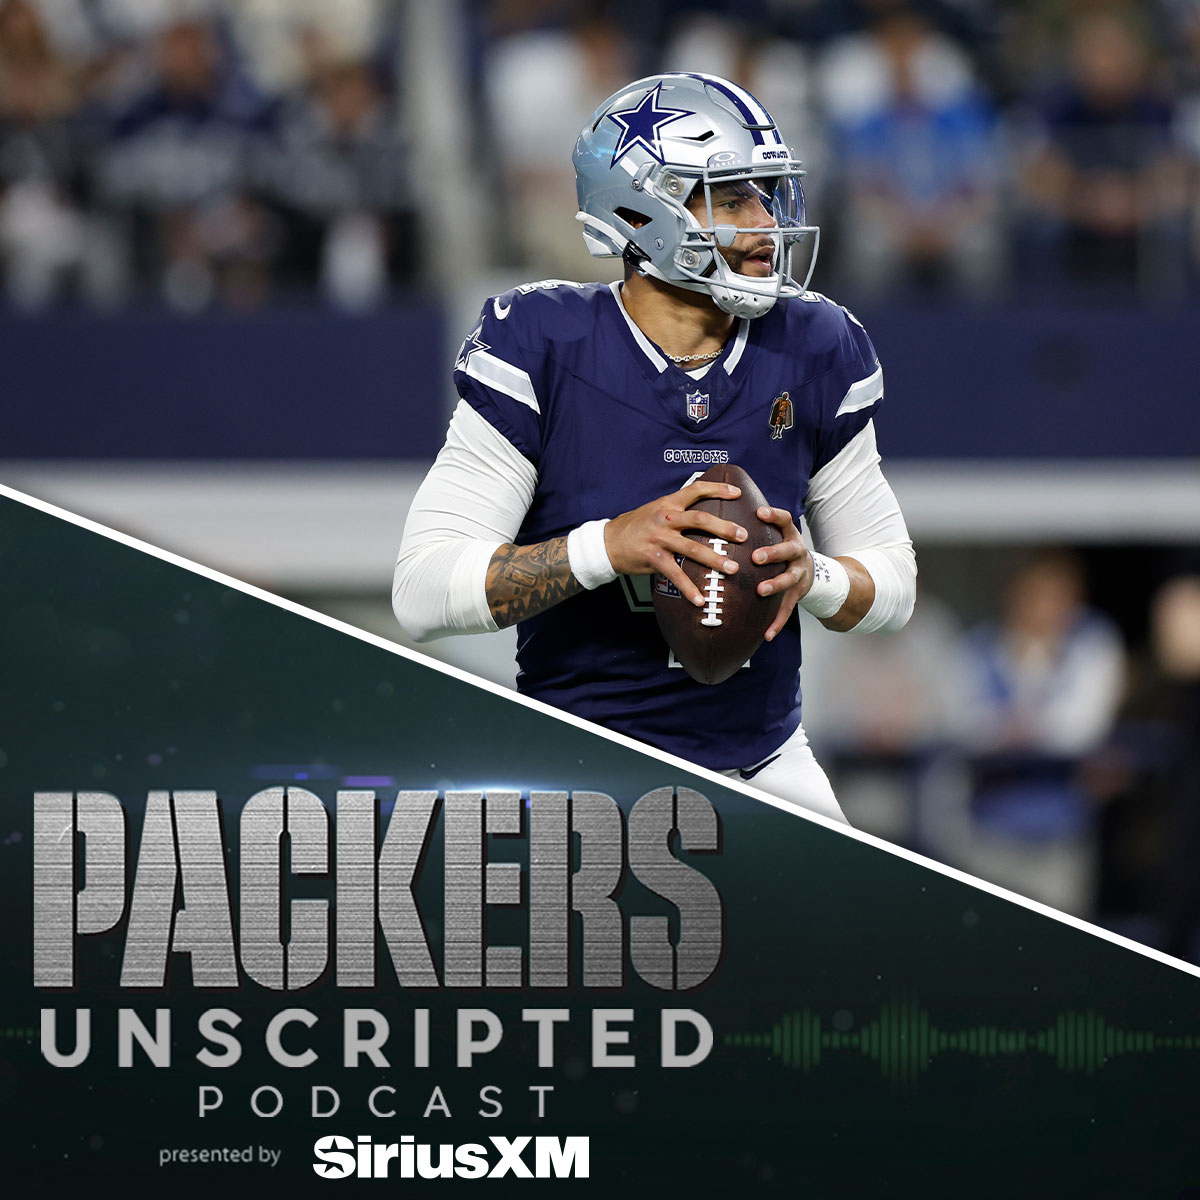 #761 Packers Unscripted: Headin’ down to Dallas